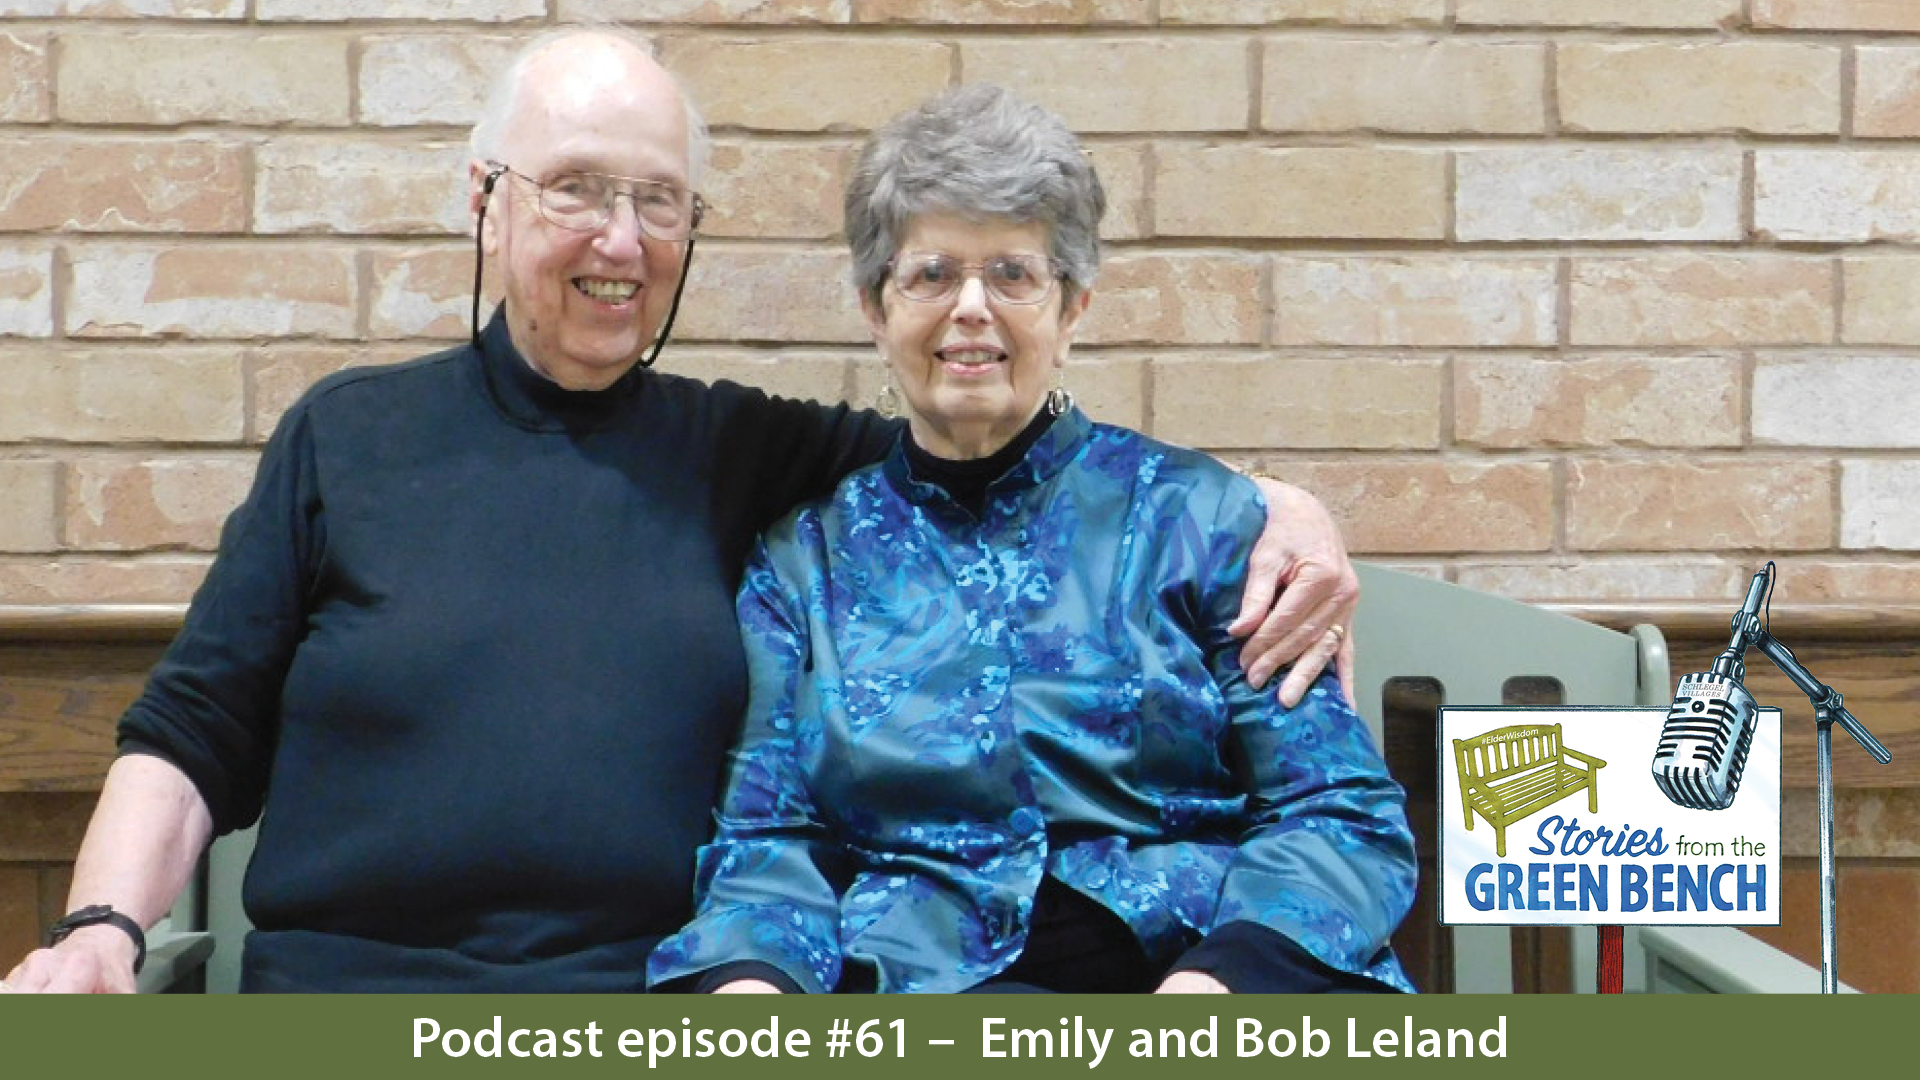 Bob & Emily Leland sharing their story from the green bench on our podcast